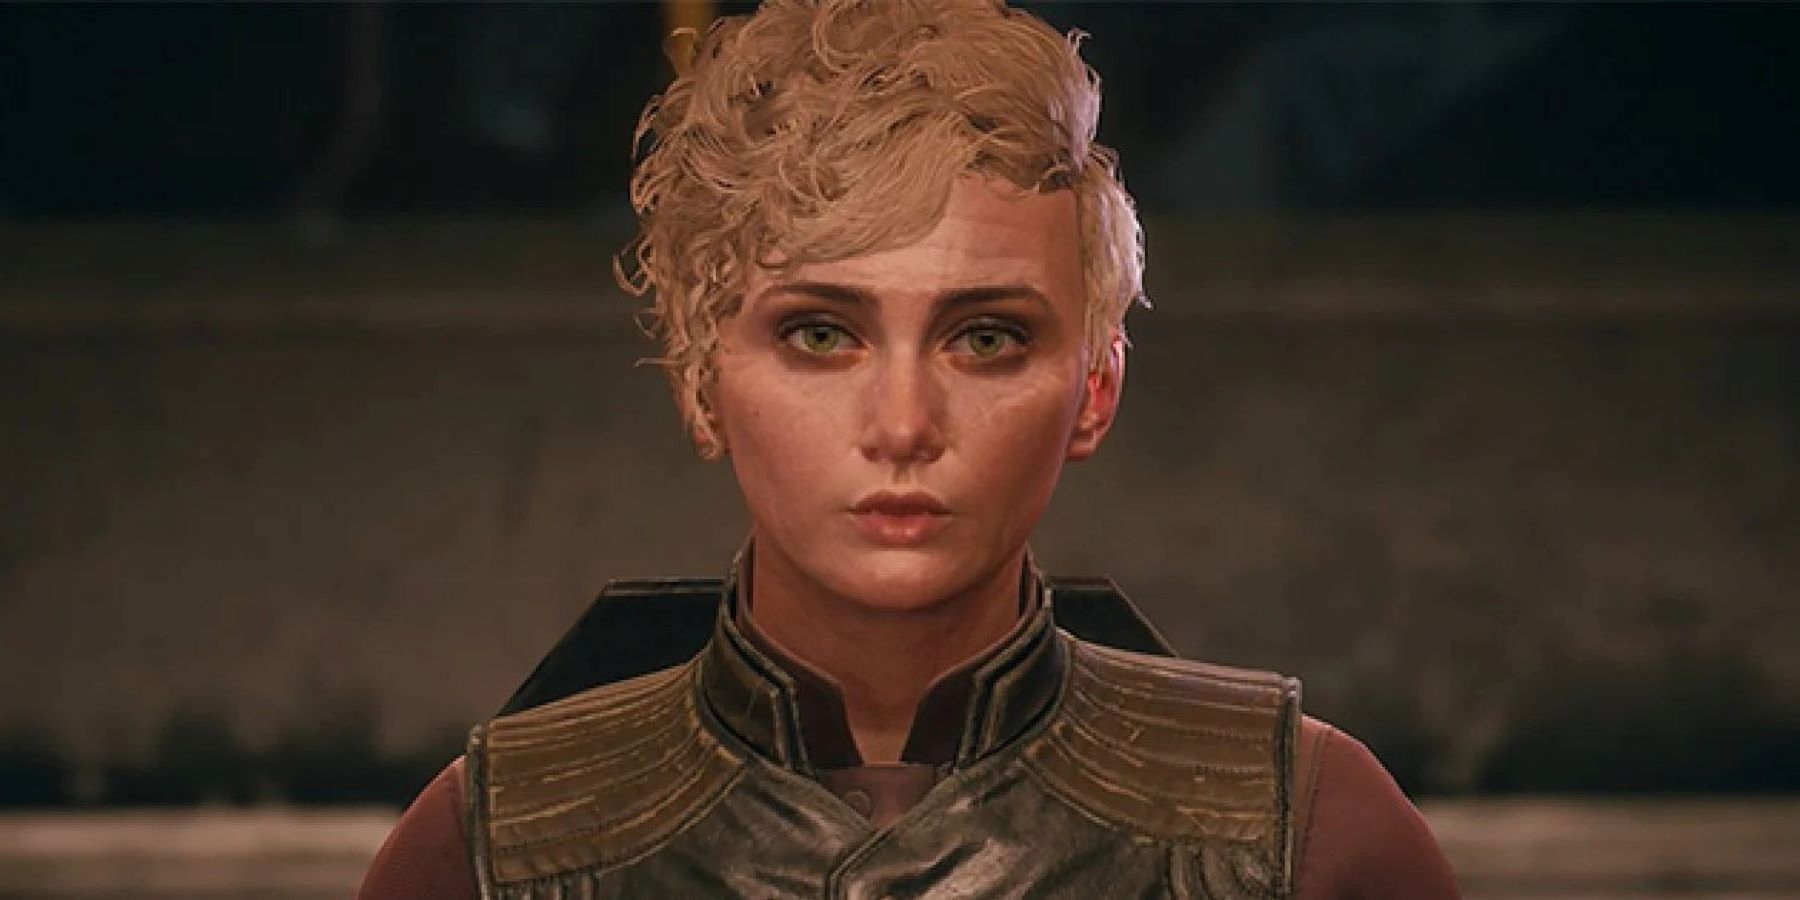 Lilya Hagen during dialogue in The Outer Worlds 2